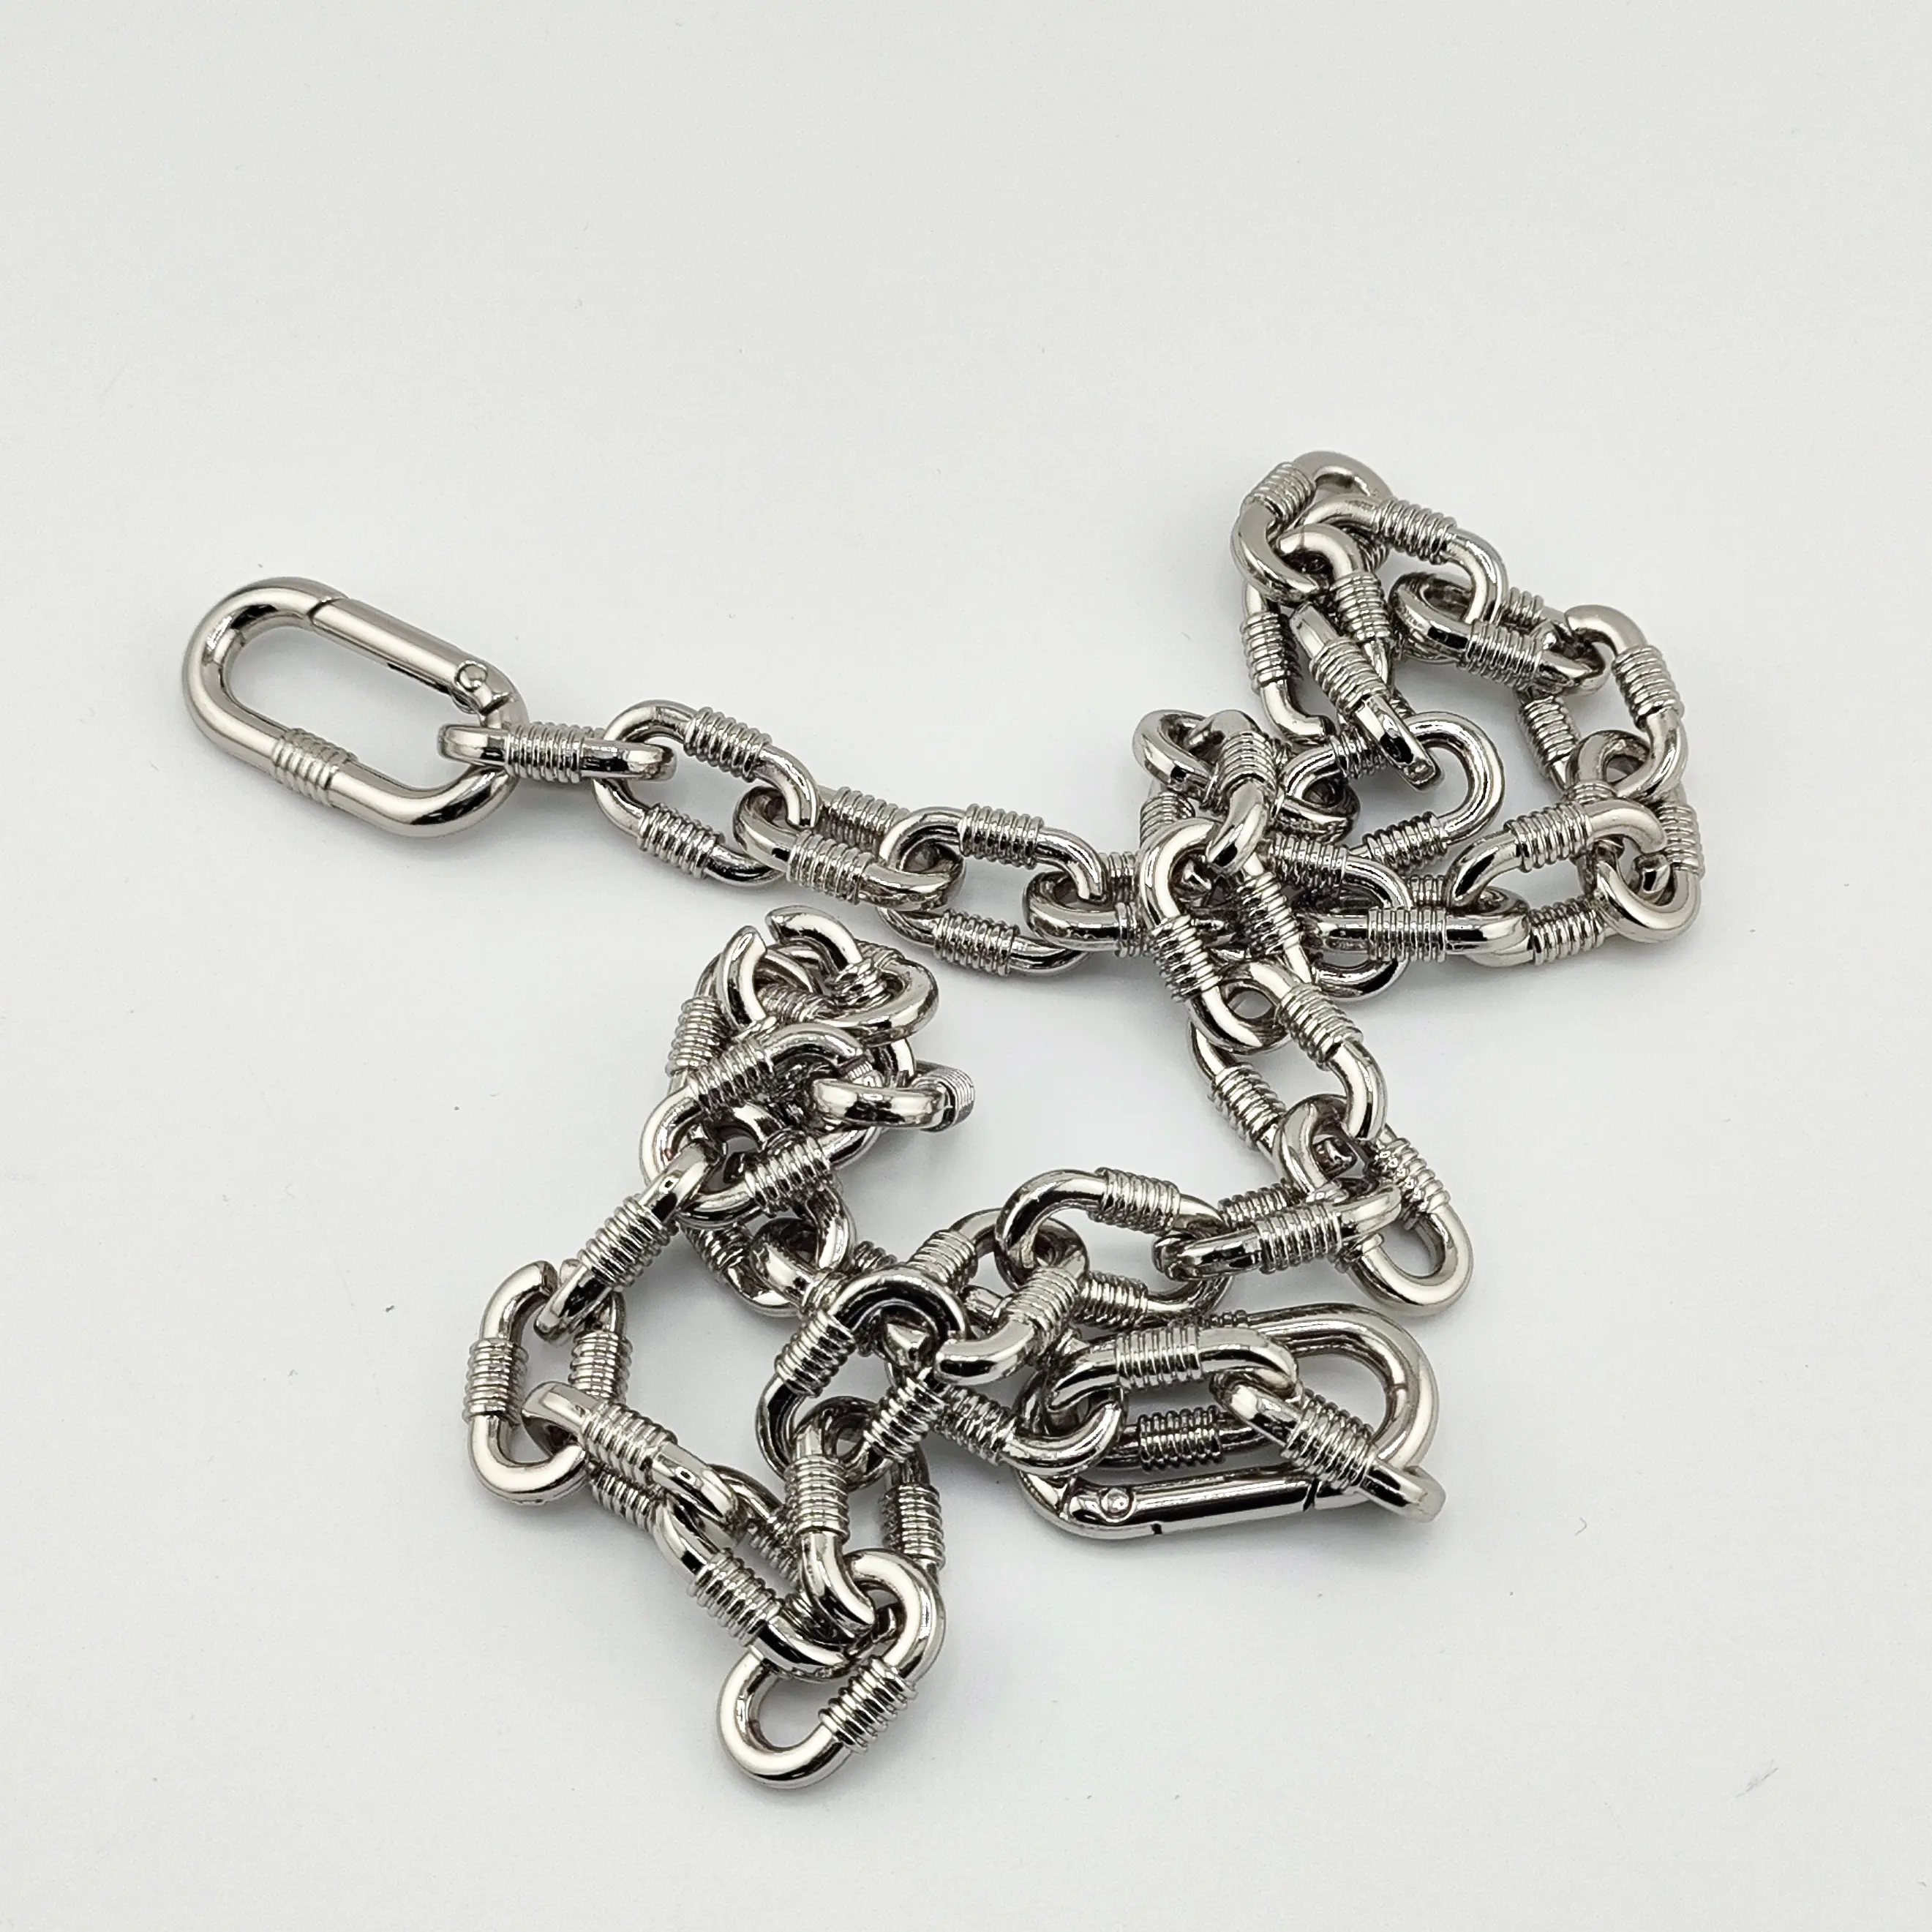 Wholesale Fashion Bag Accessories Full Length 63cm Iron Metal Chains Bag Chains For Bags and Purse